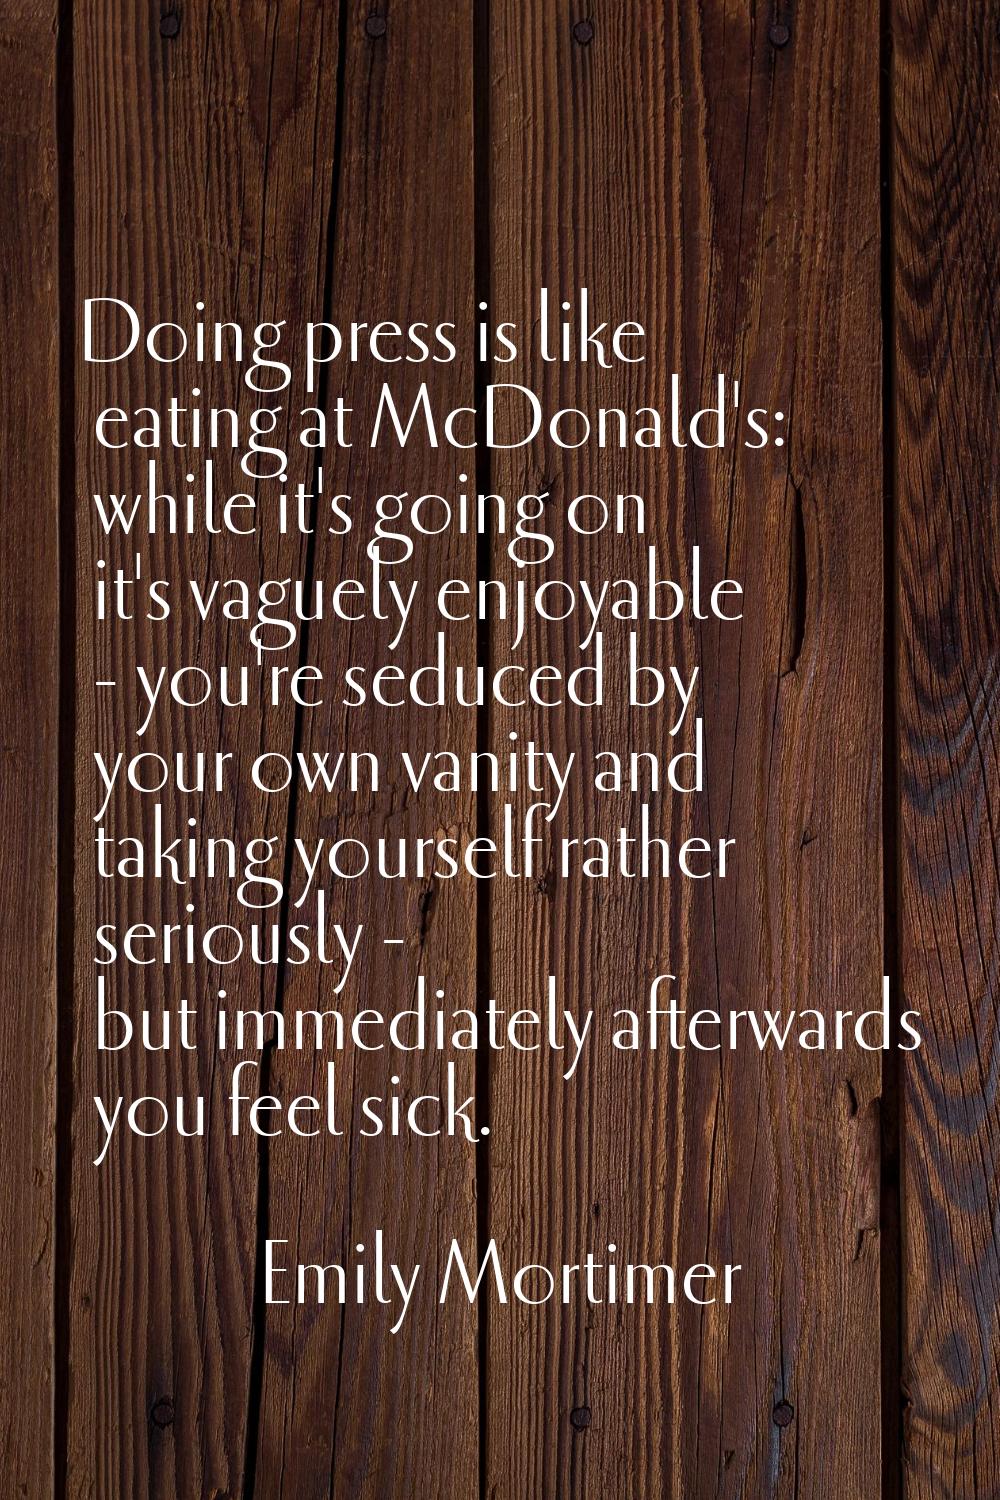 Doing press is like eating at McDonald's: while it's going on it's vaguely enjoyable - you're seduc